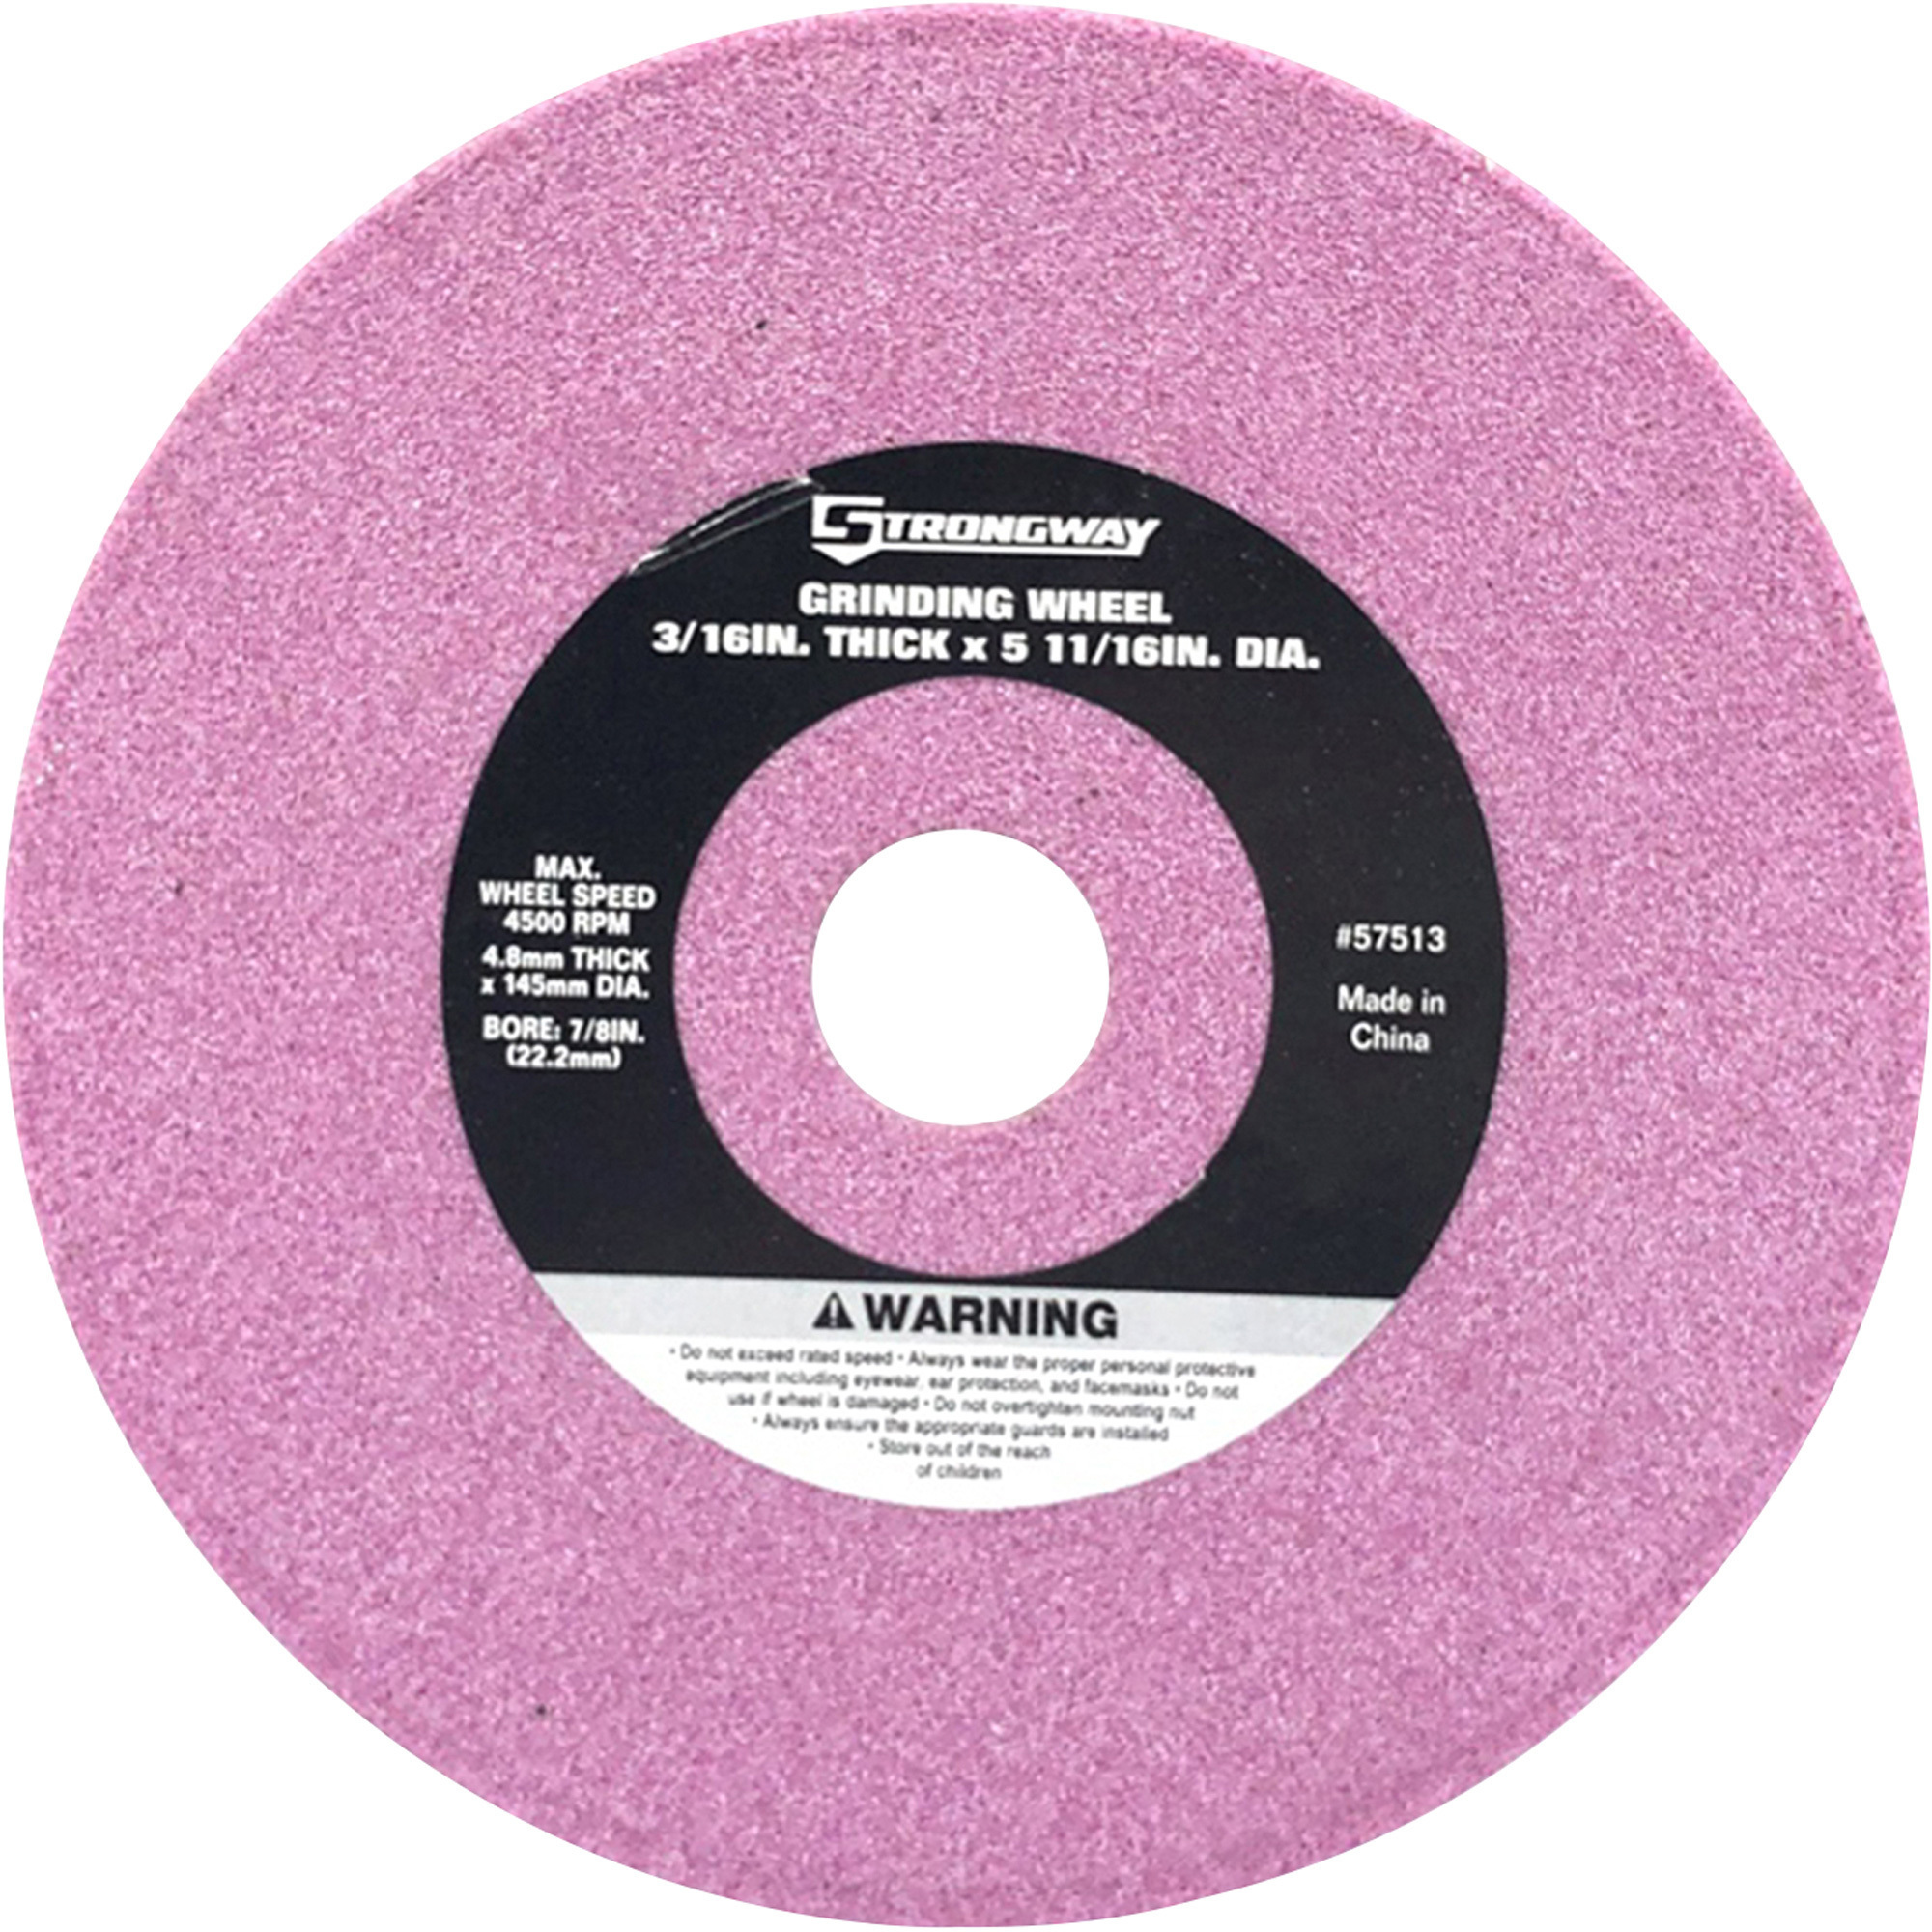 Strongway Grinding Wheel, 3/16Inch Thick x 5 11/16Inch Diameter